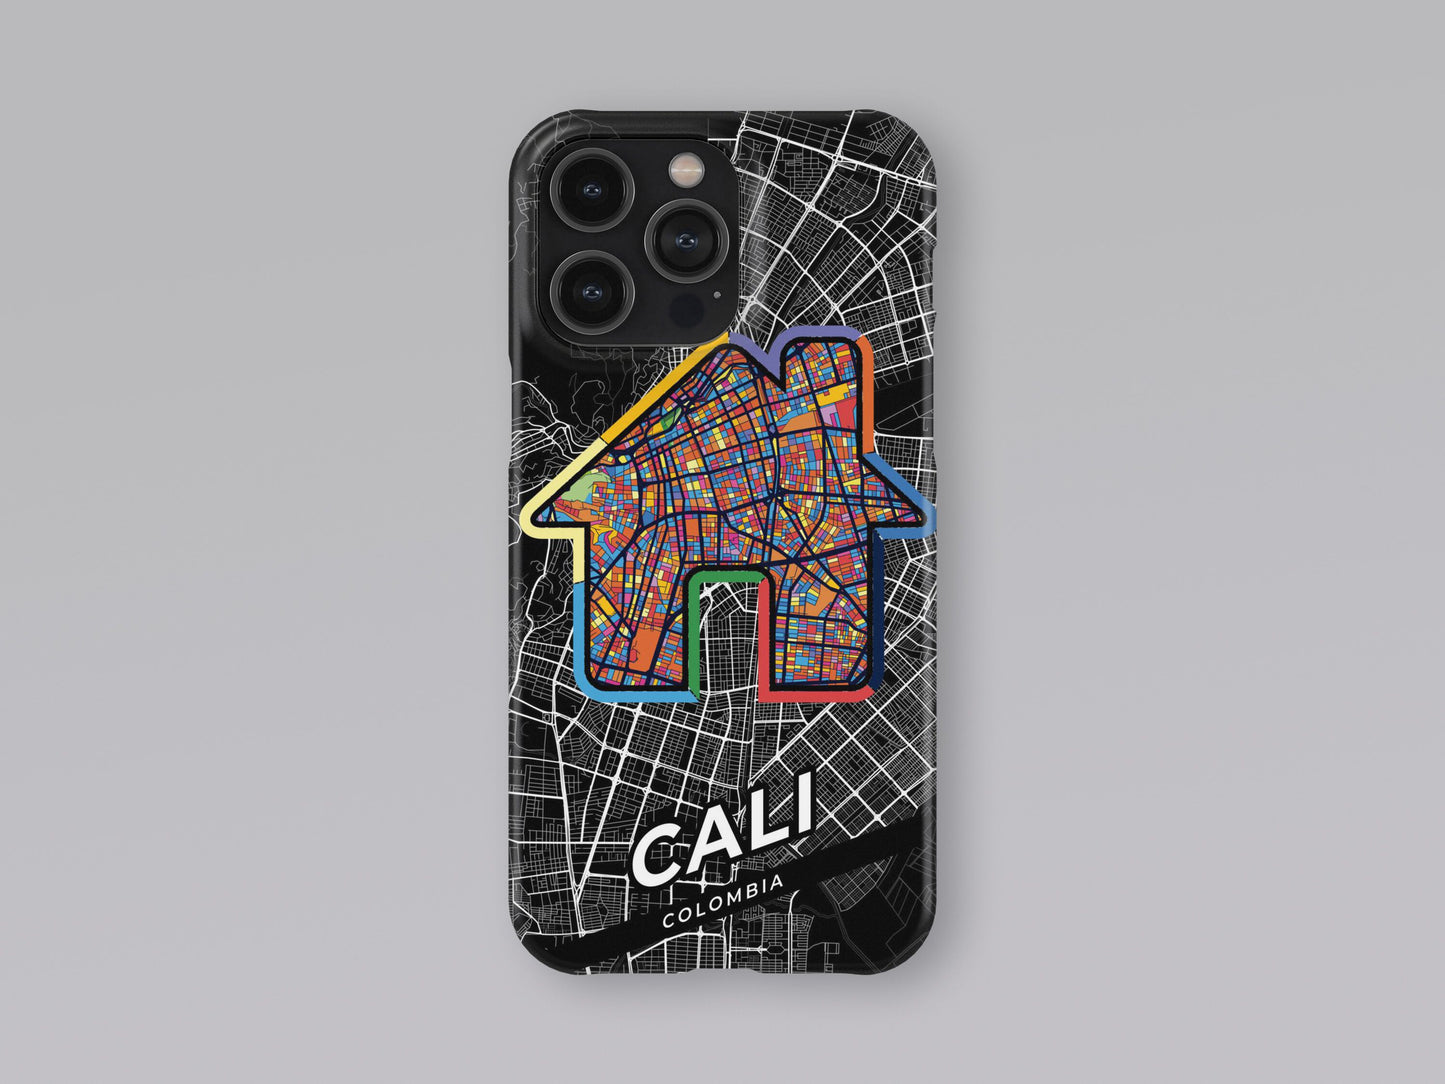 Cali Colombia slim phone case with colorful icon. Birthday, wedding or housewarming gift. Couple match cases. 3